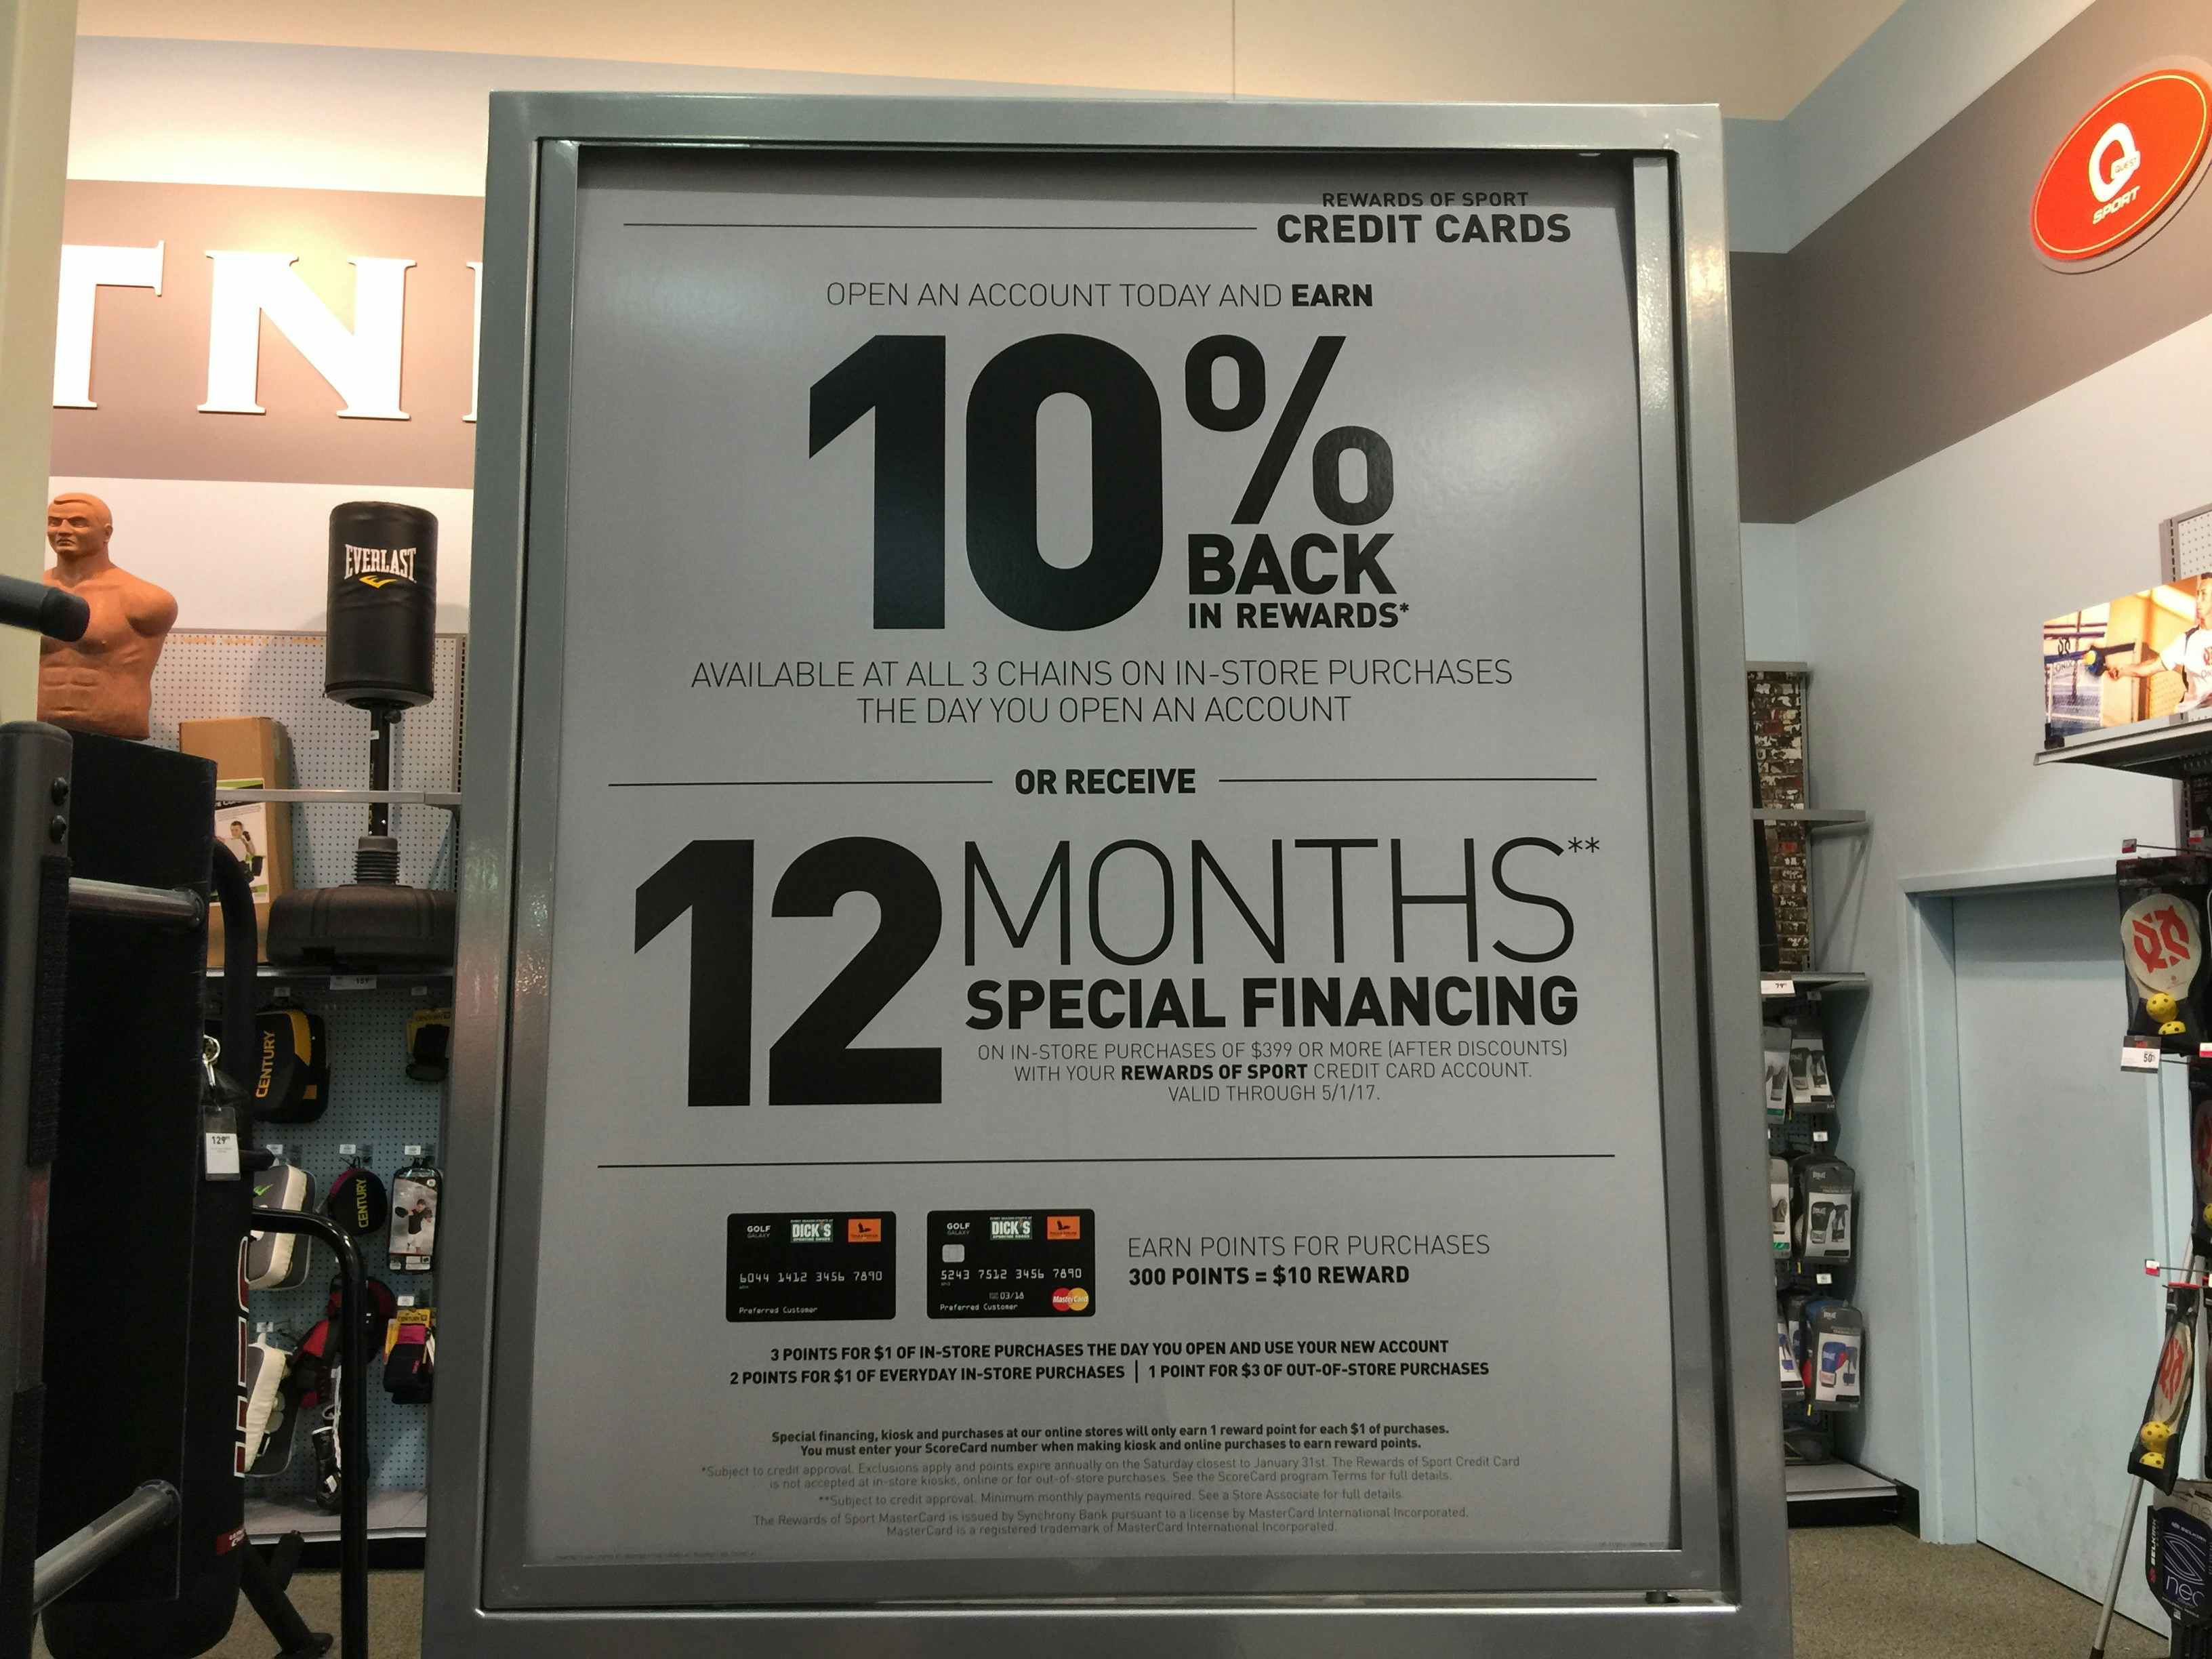 A sign inside Dick's Sporting Goods advertising their credit card perks, including 10% back in rewards, and 12 months special financing.